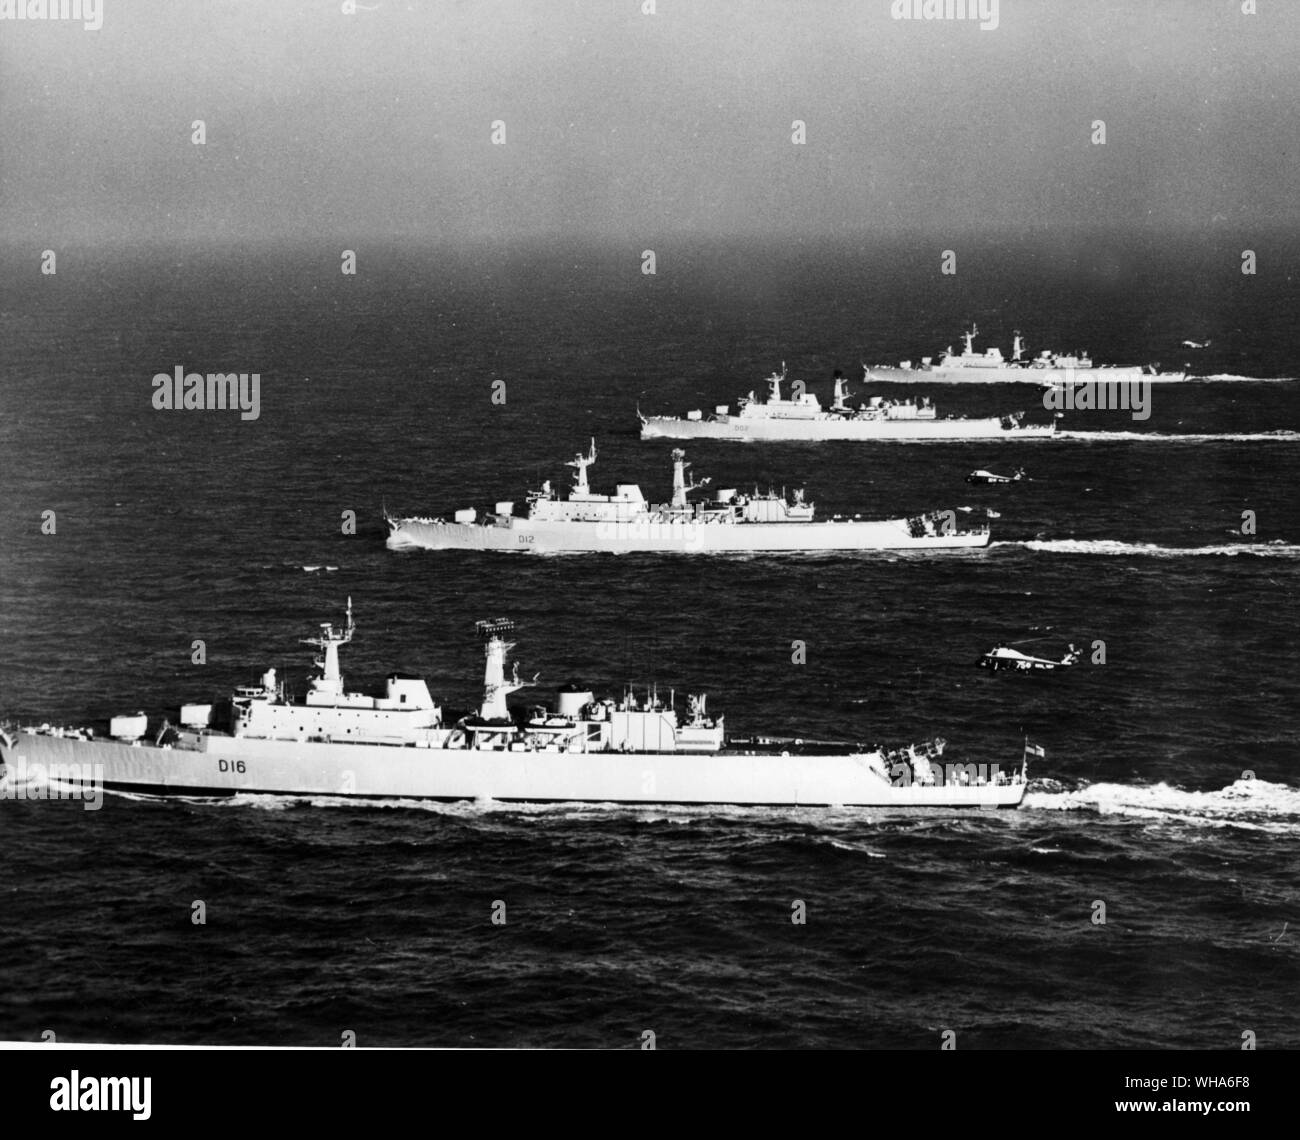 The Four Sisters, the four County Class Guided Missile Destroyers now in service with the Royal Navy in line abreast during exercises in the channel. Front to rear, HMS London, HMS Kent, KMS Devonshire and HMS Hampshire with their Wessex helicopters in flight. February 1964 Stock Photo